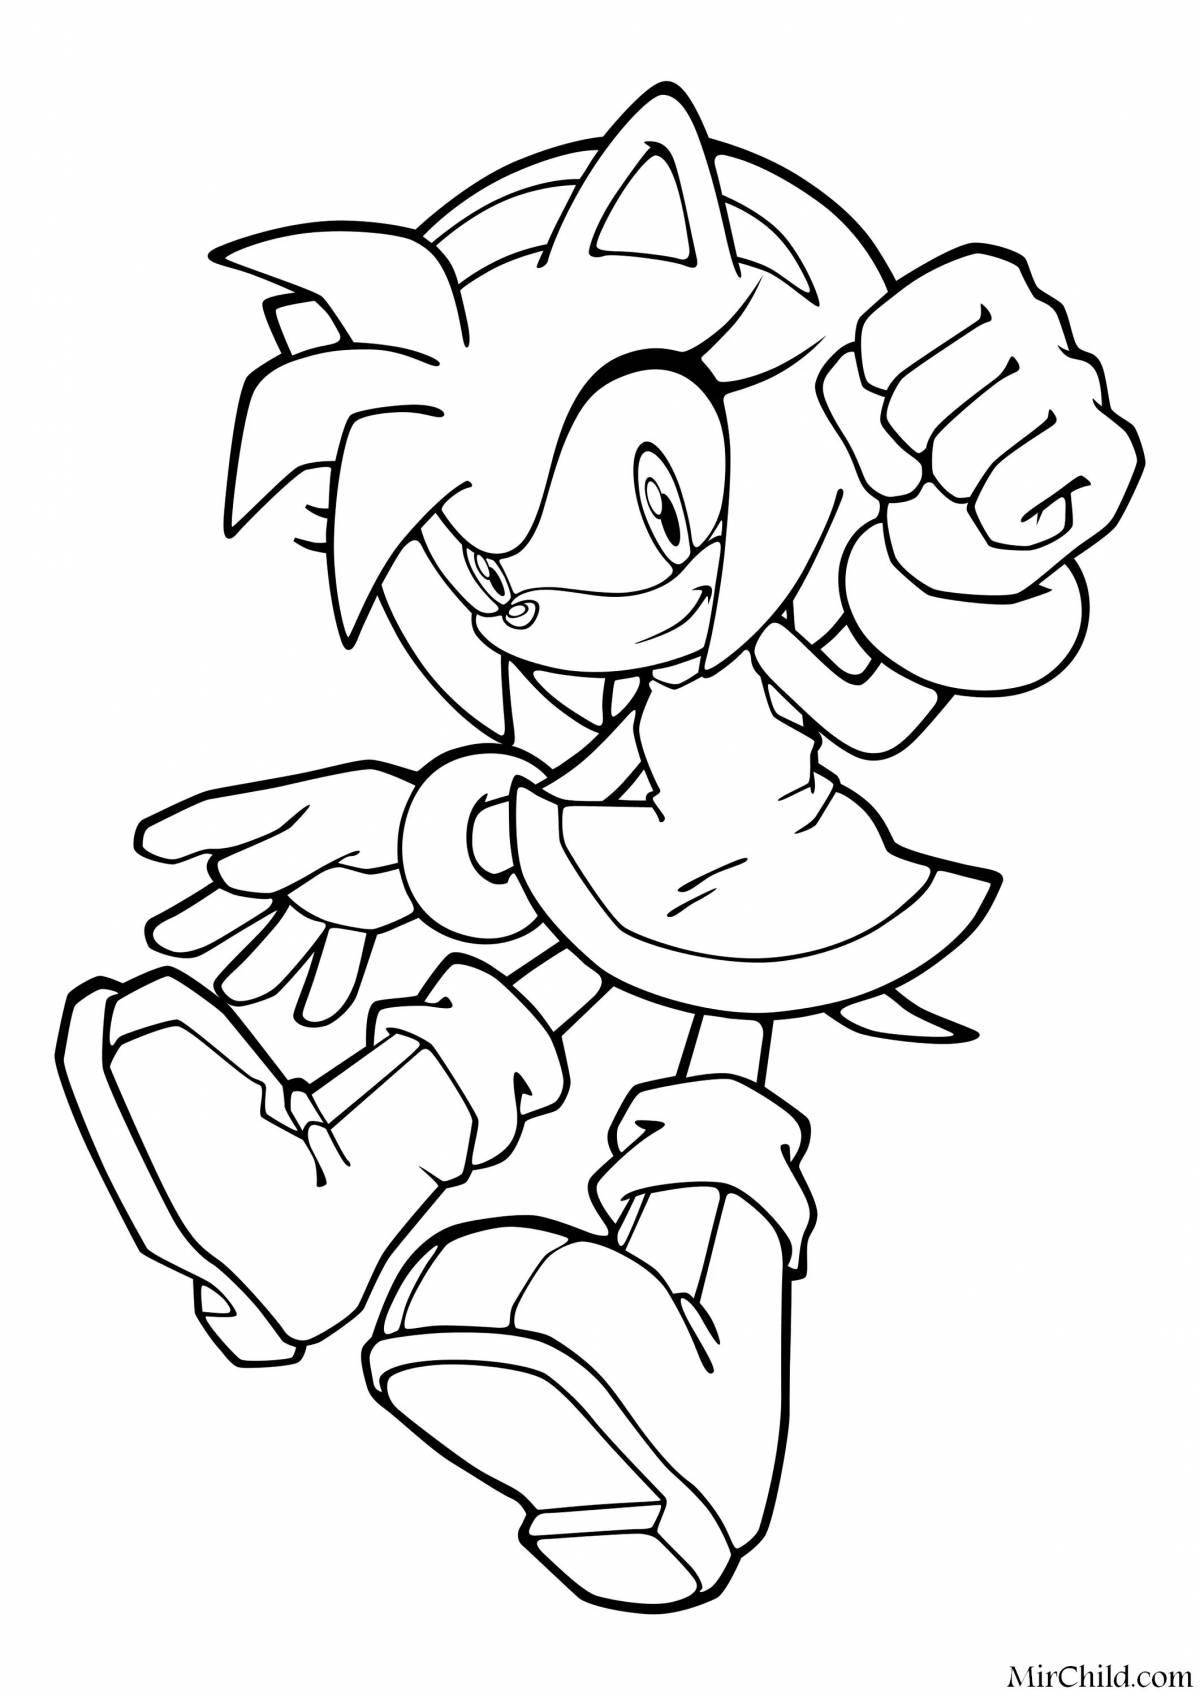 Sonic and amy rose fun coloring book